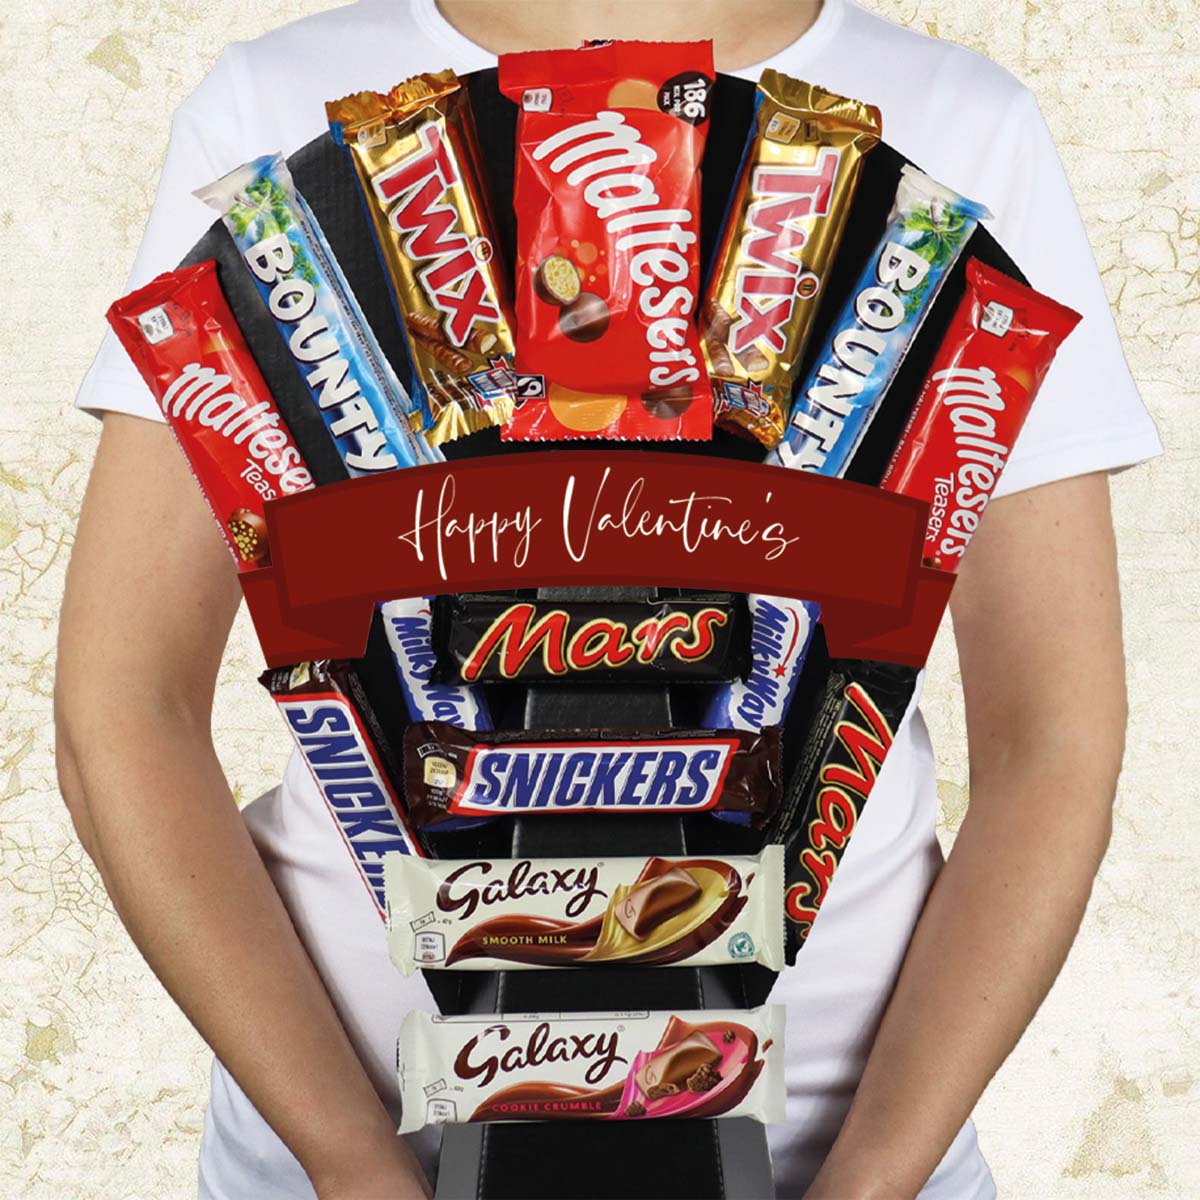 The Valentine’s Mega Variety XL Chocolate Bouquet - Perfect Way To Say I Love You - Gift Hamper Box by HamperWell